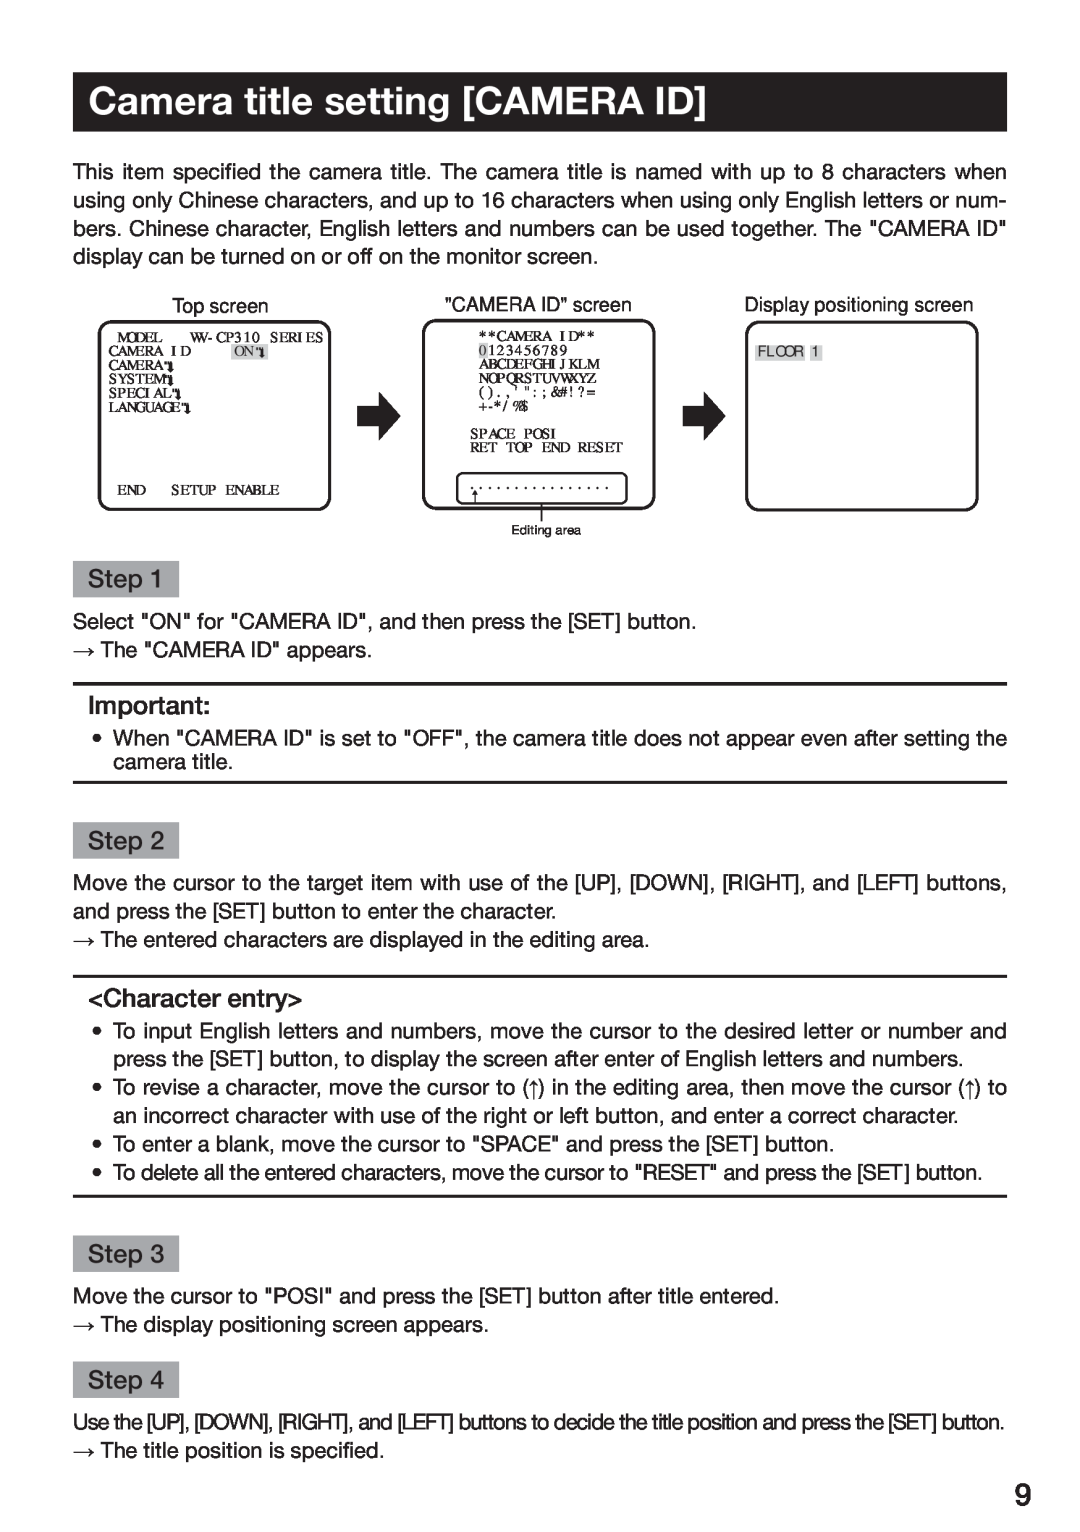 Panasonic WV-CP314, WV-CP310, WV-CP304, WV-CP300 operating instructions Camera title setting CAMERA ID, Character entry, Step 